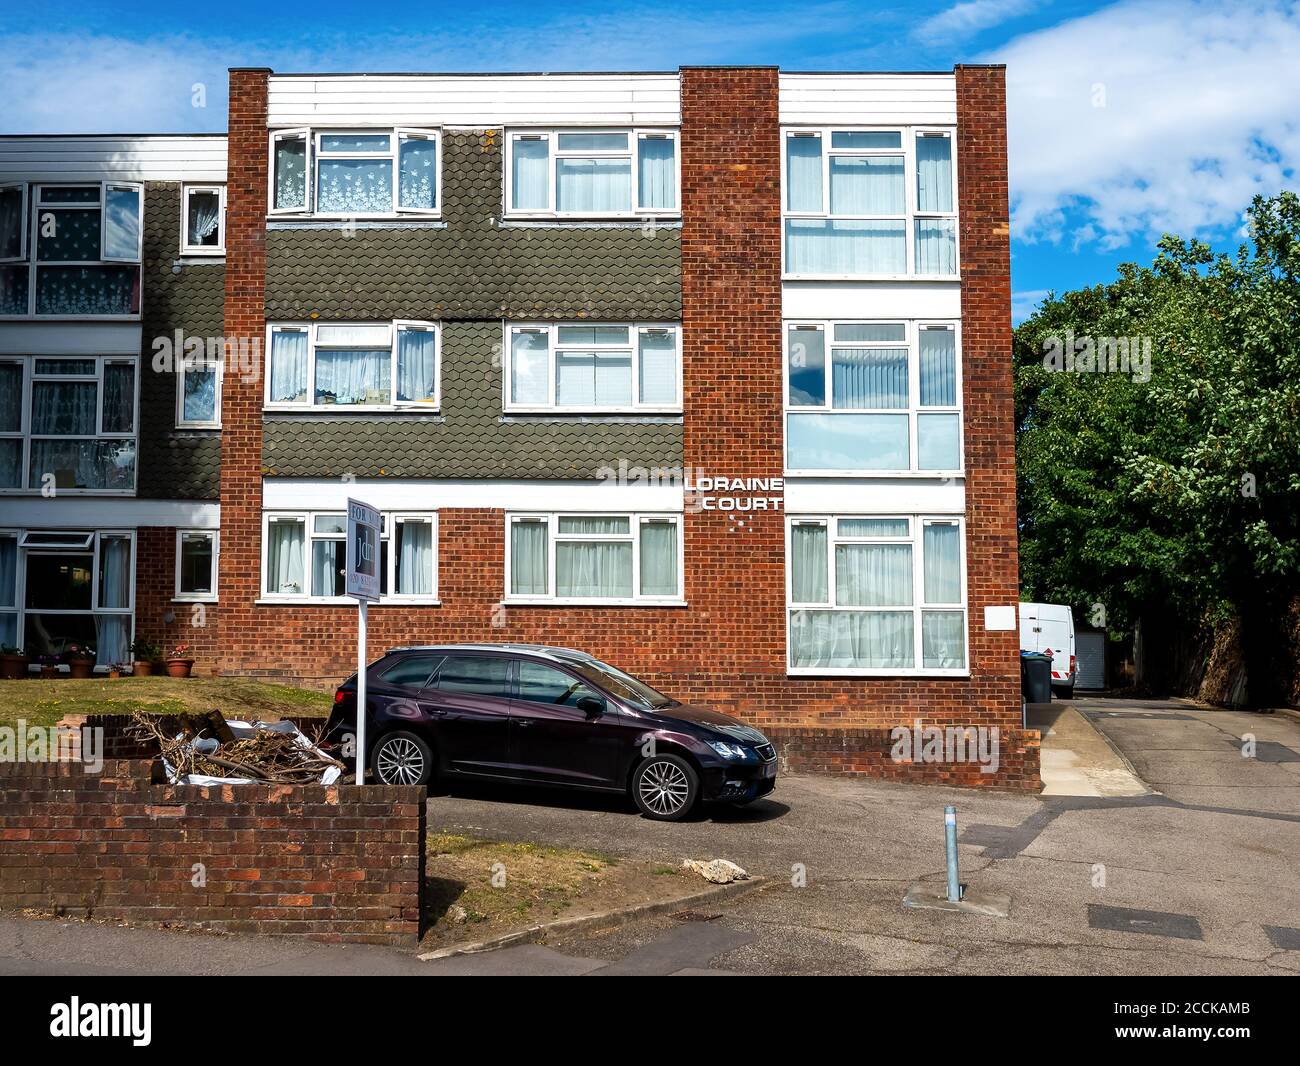 A block of apartments three stories high called Loraine Court with a for sale sign outside, taken at Red Hill Chislehurst South London 5th August 2020 Stock Photo